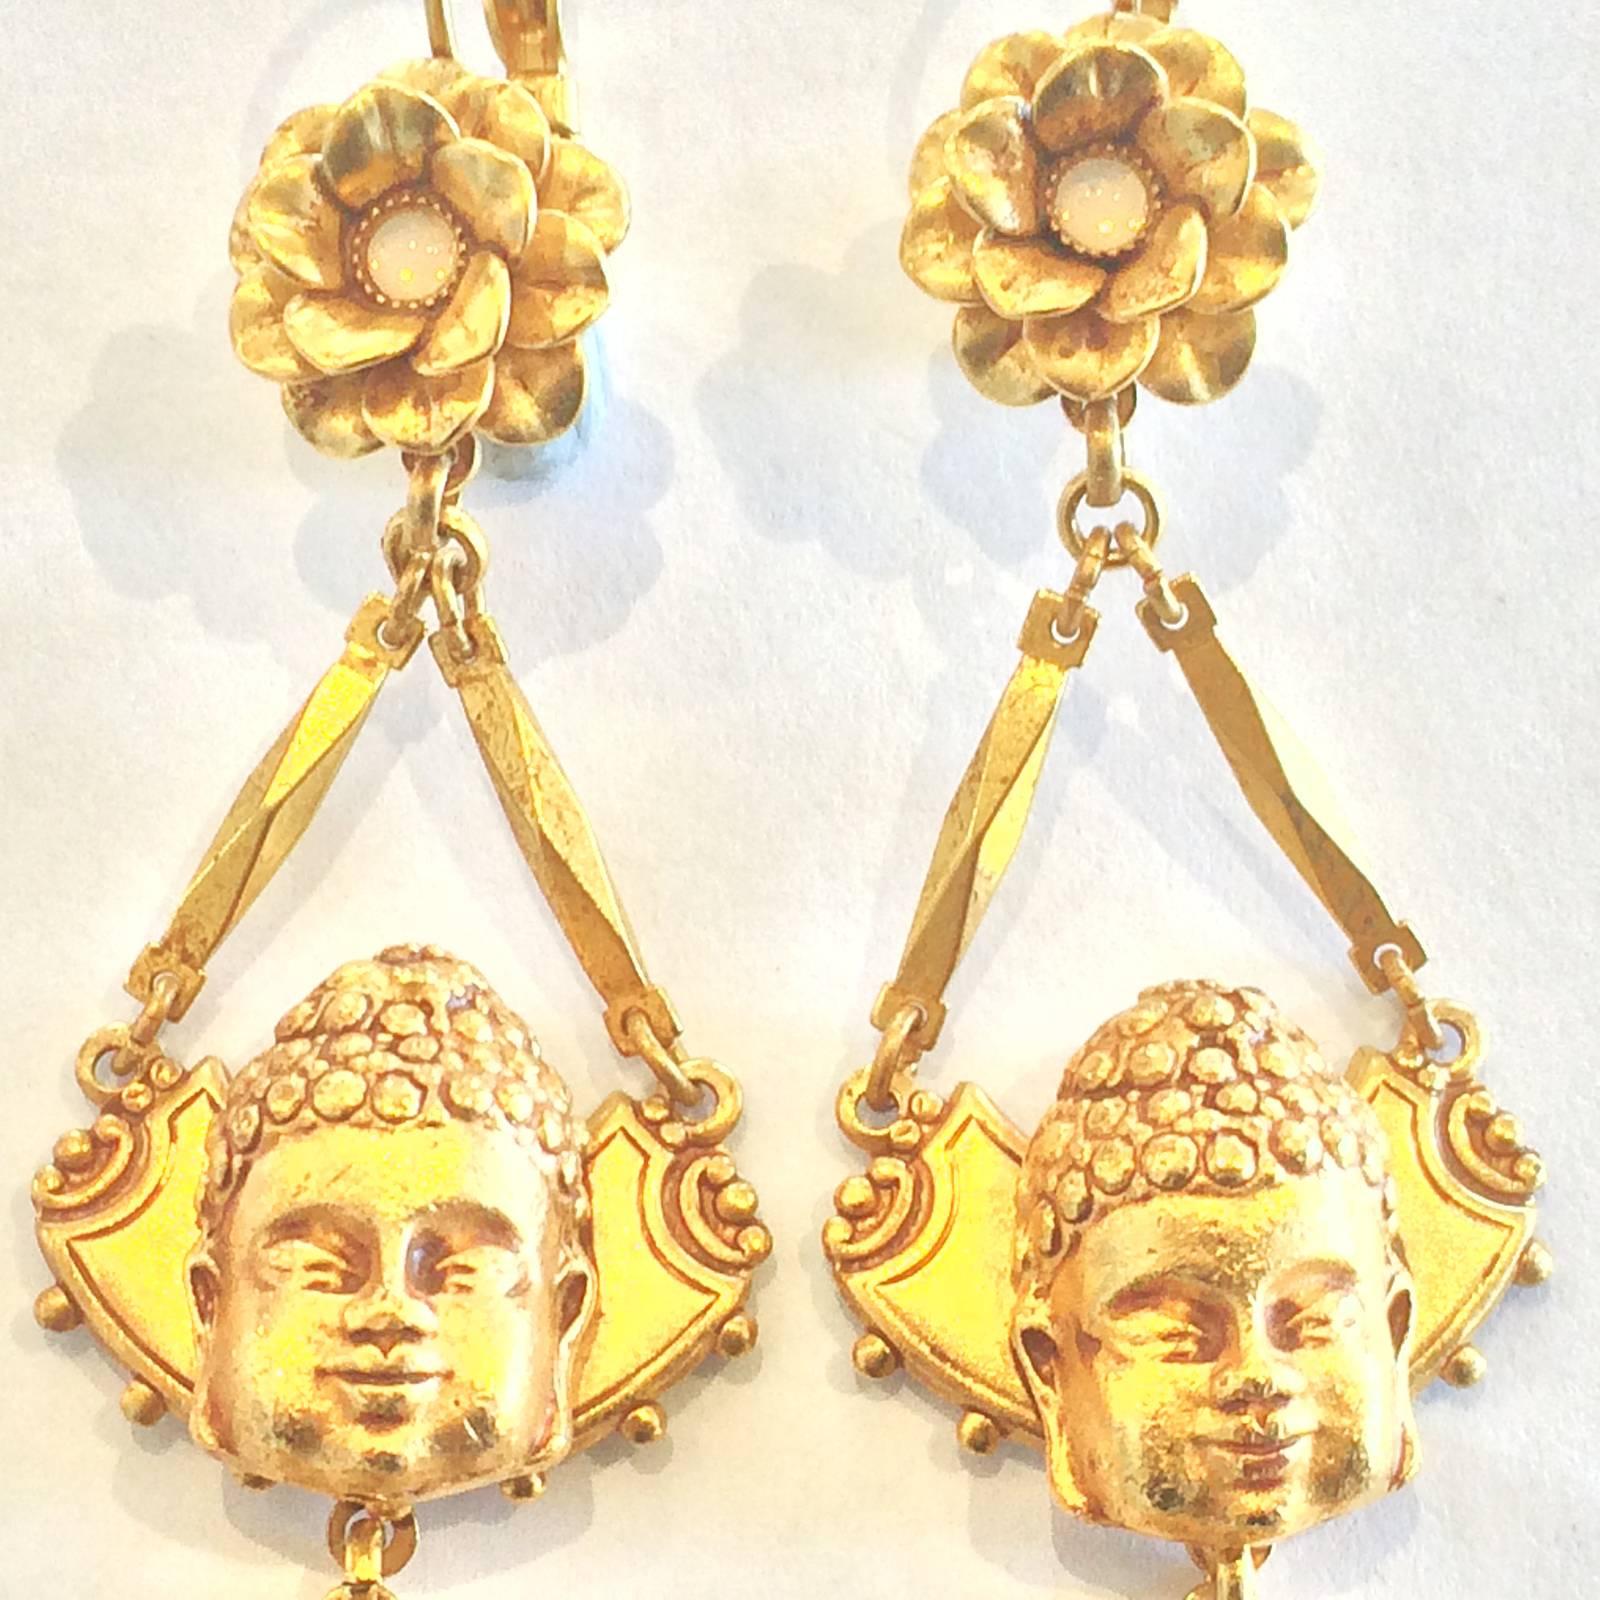 Askew of London Earrings in intense Gold finish equivalent to 18ct gold. Displaying Buddha with Flower above with Mother of Pearl centre, and a M. O. Pearl disk set to front of Asian “gold” at lower pendant. Intense 3 dimensional detail and in mint